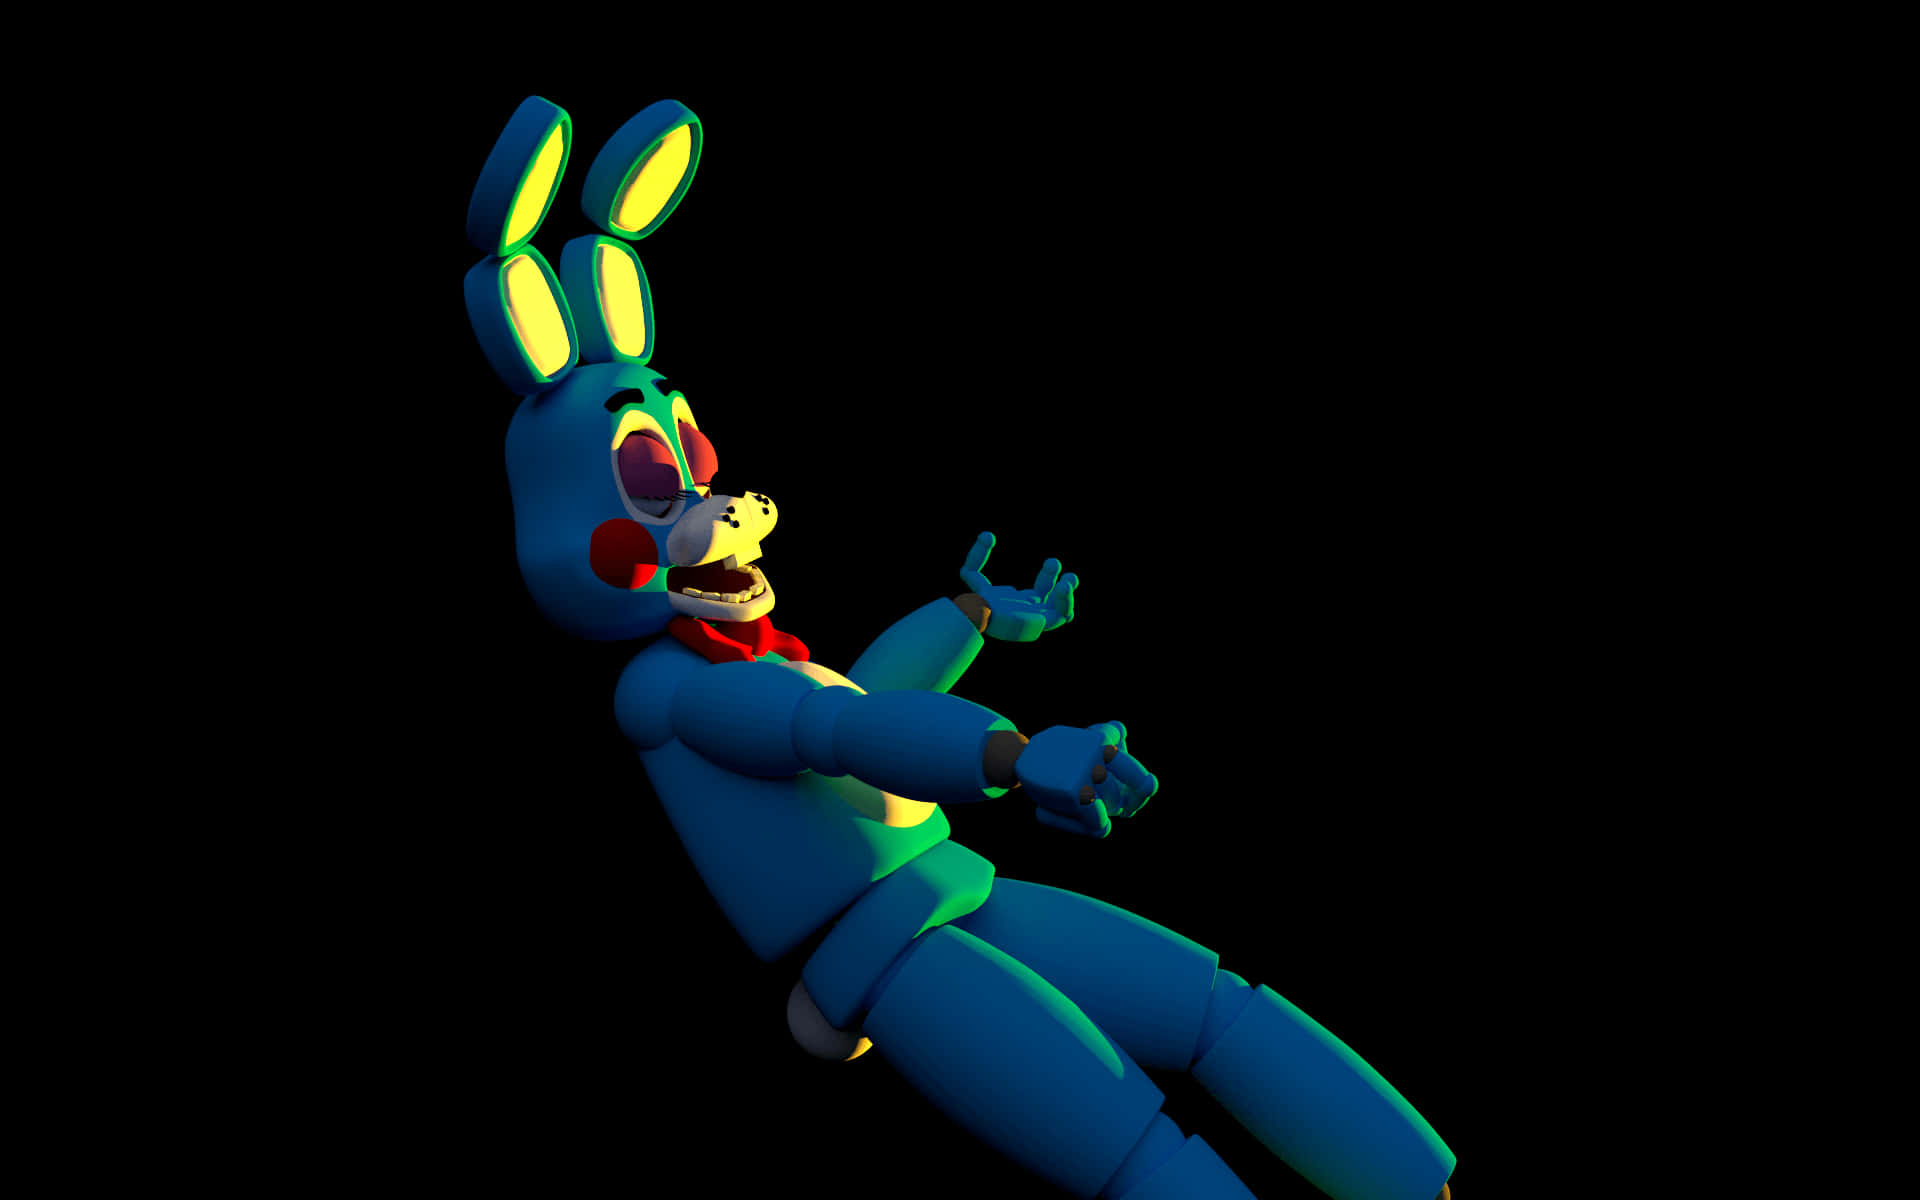 A Blue Bunny Character Is Flying In The Dark Wallpaper